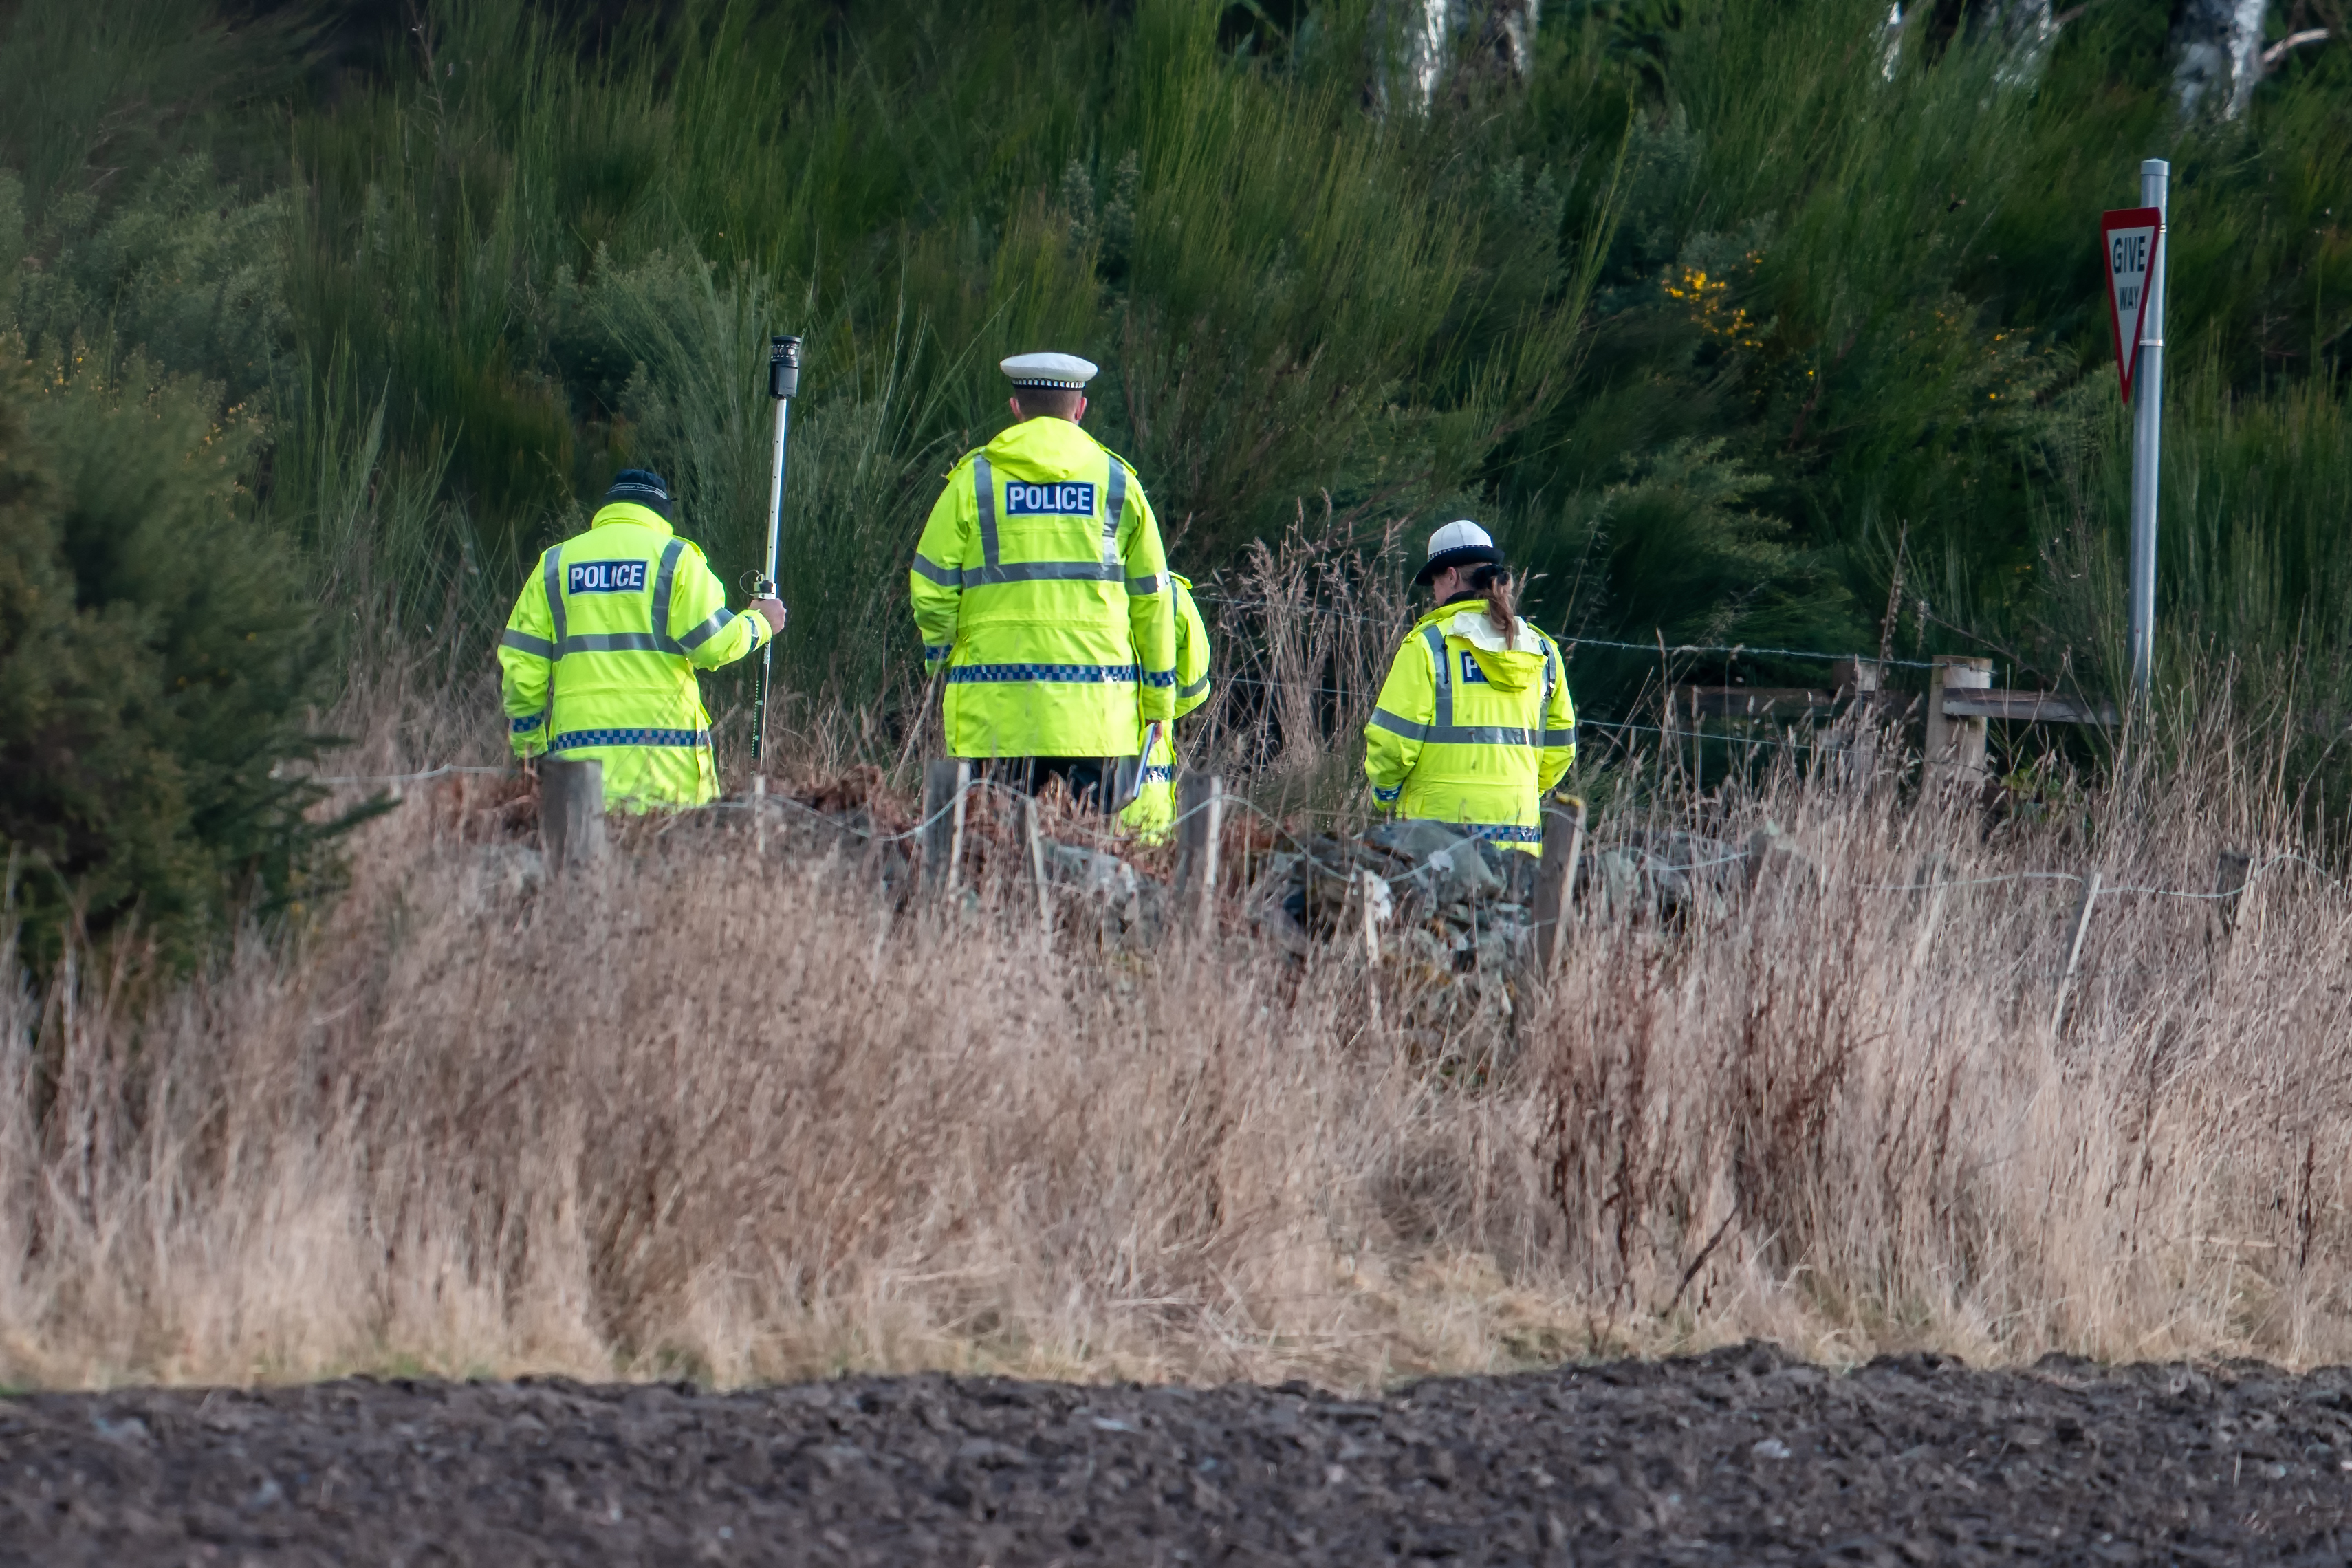 The B9176 Road approx 500m north of the B817 leading to Alness, Highlands, following the fatal collision.